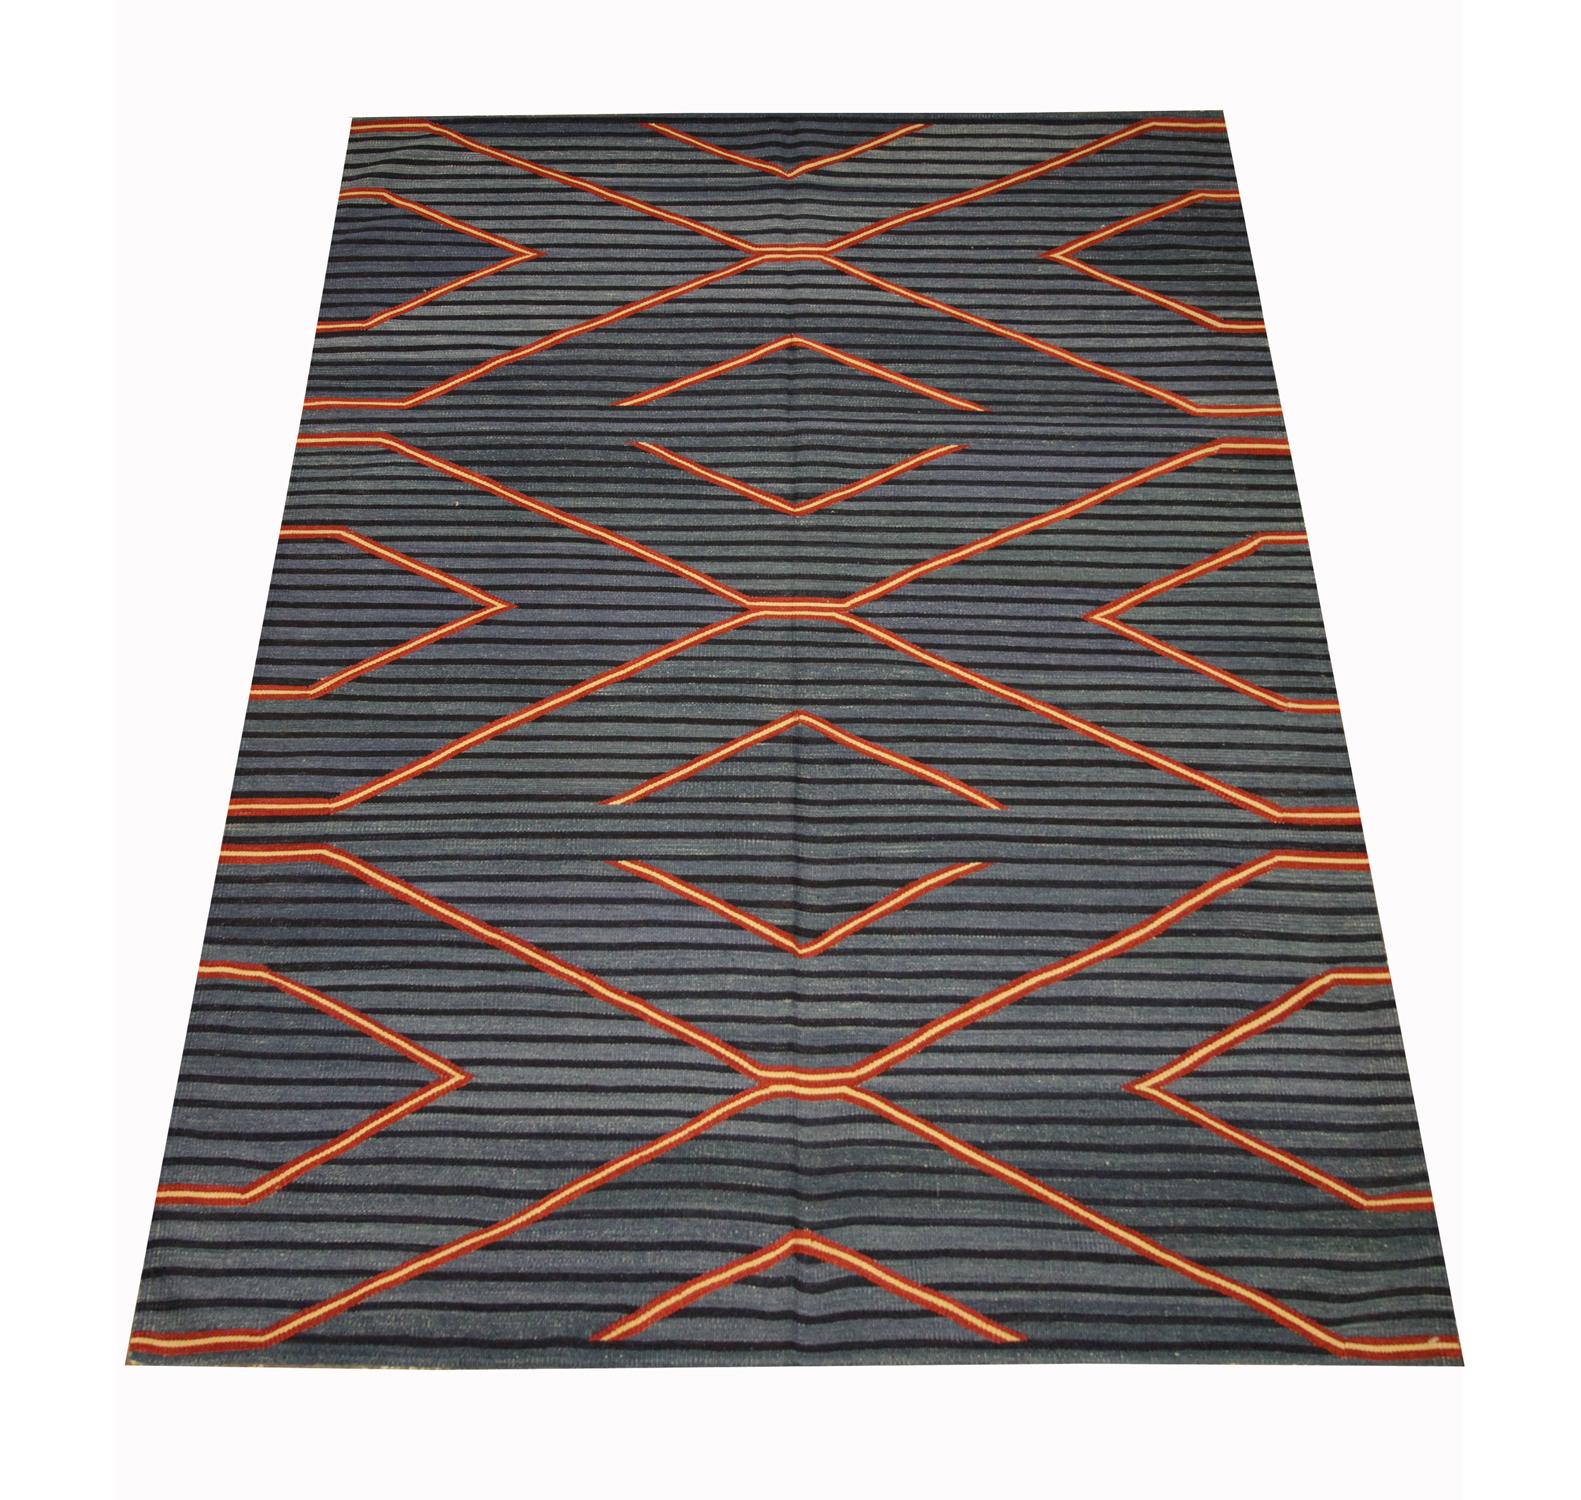 This elegant rug is a modern kilim rug woven by hand with traditional techniques and materials. The design features a striped black and blue pattern with accents of red and beige that make up the interwoven geometric design. The simple colour